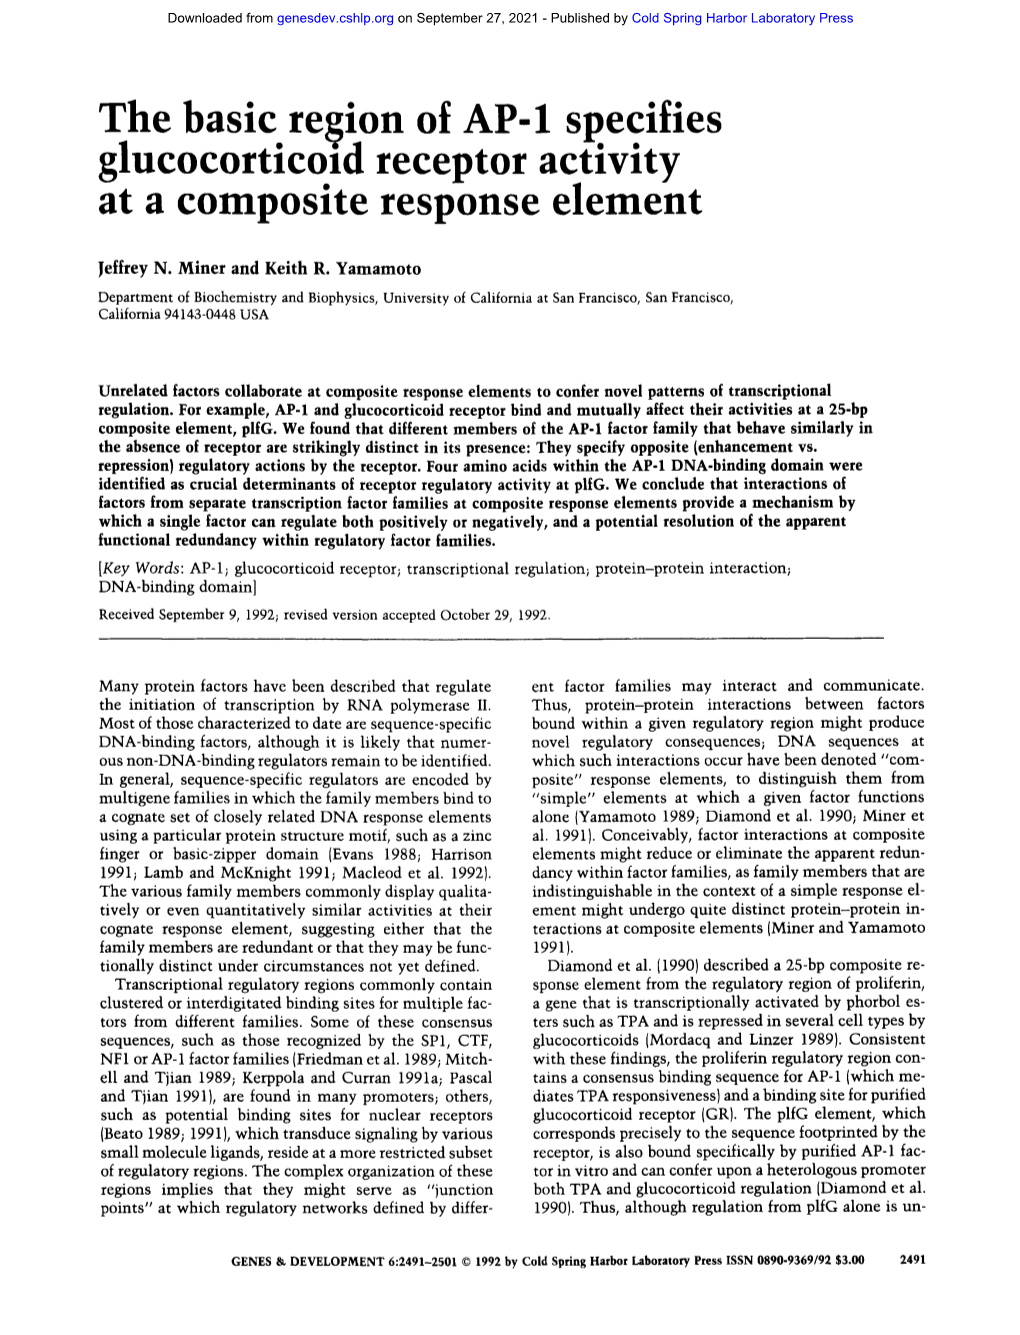 The Basic Region of AP-1 Specifies Glucocortico D Receptor Activity at a Composite Response Element